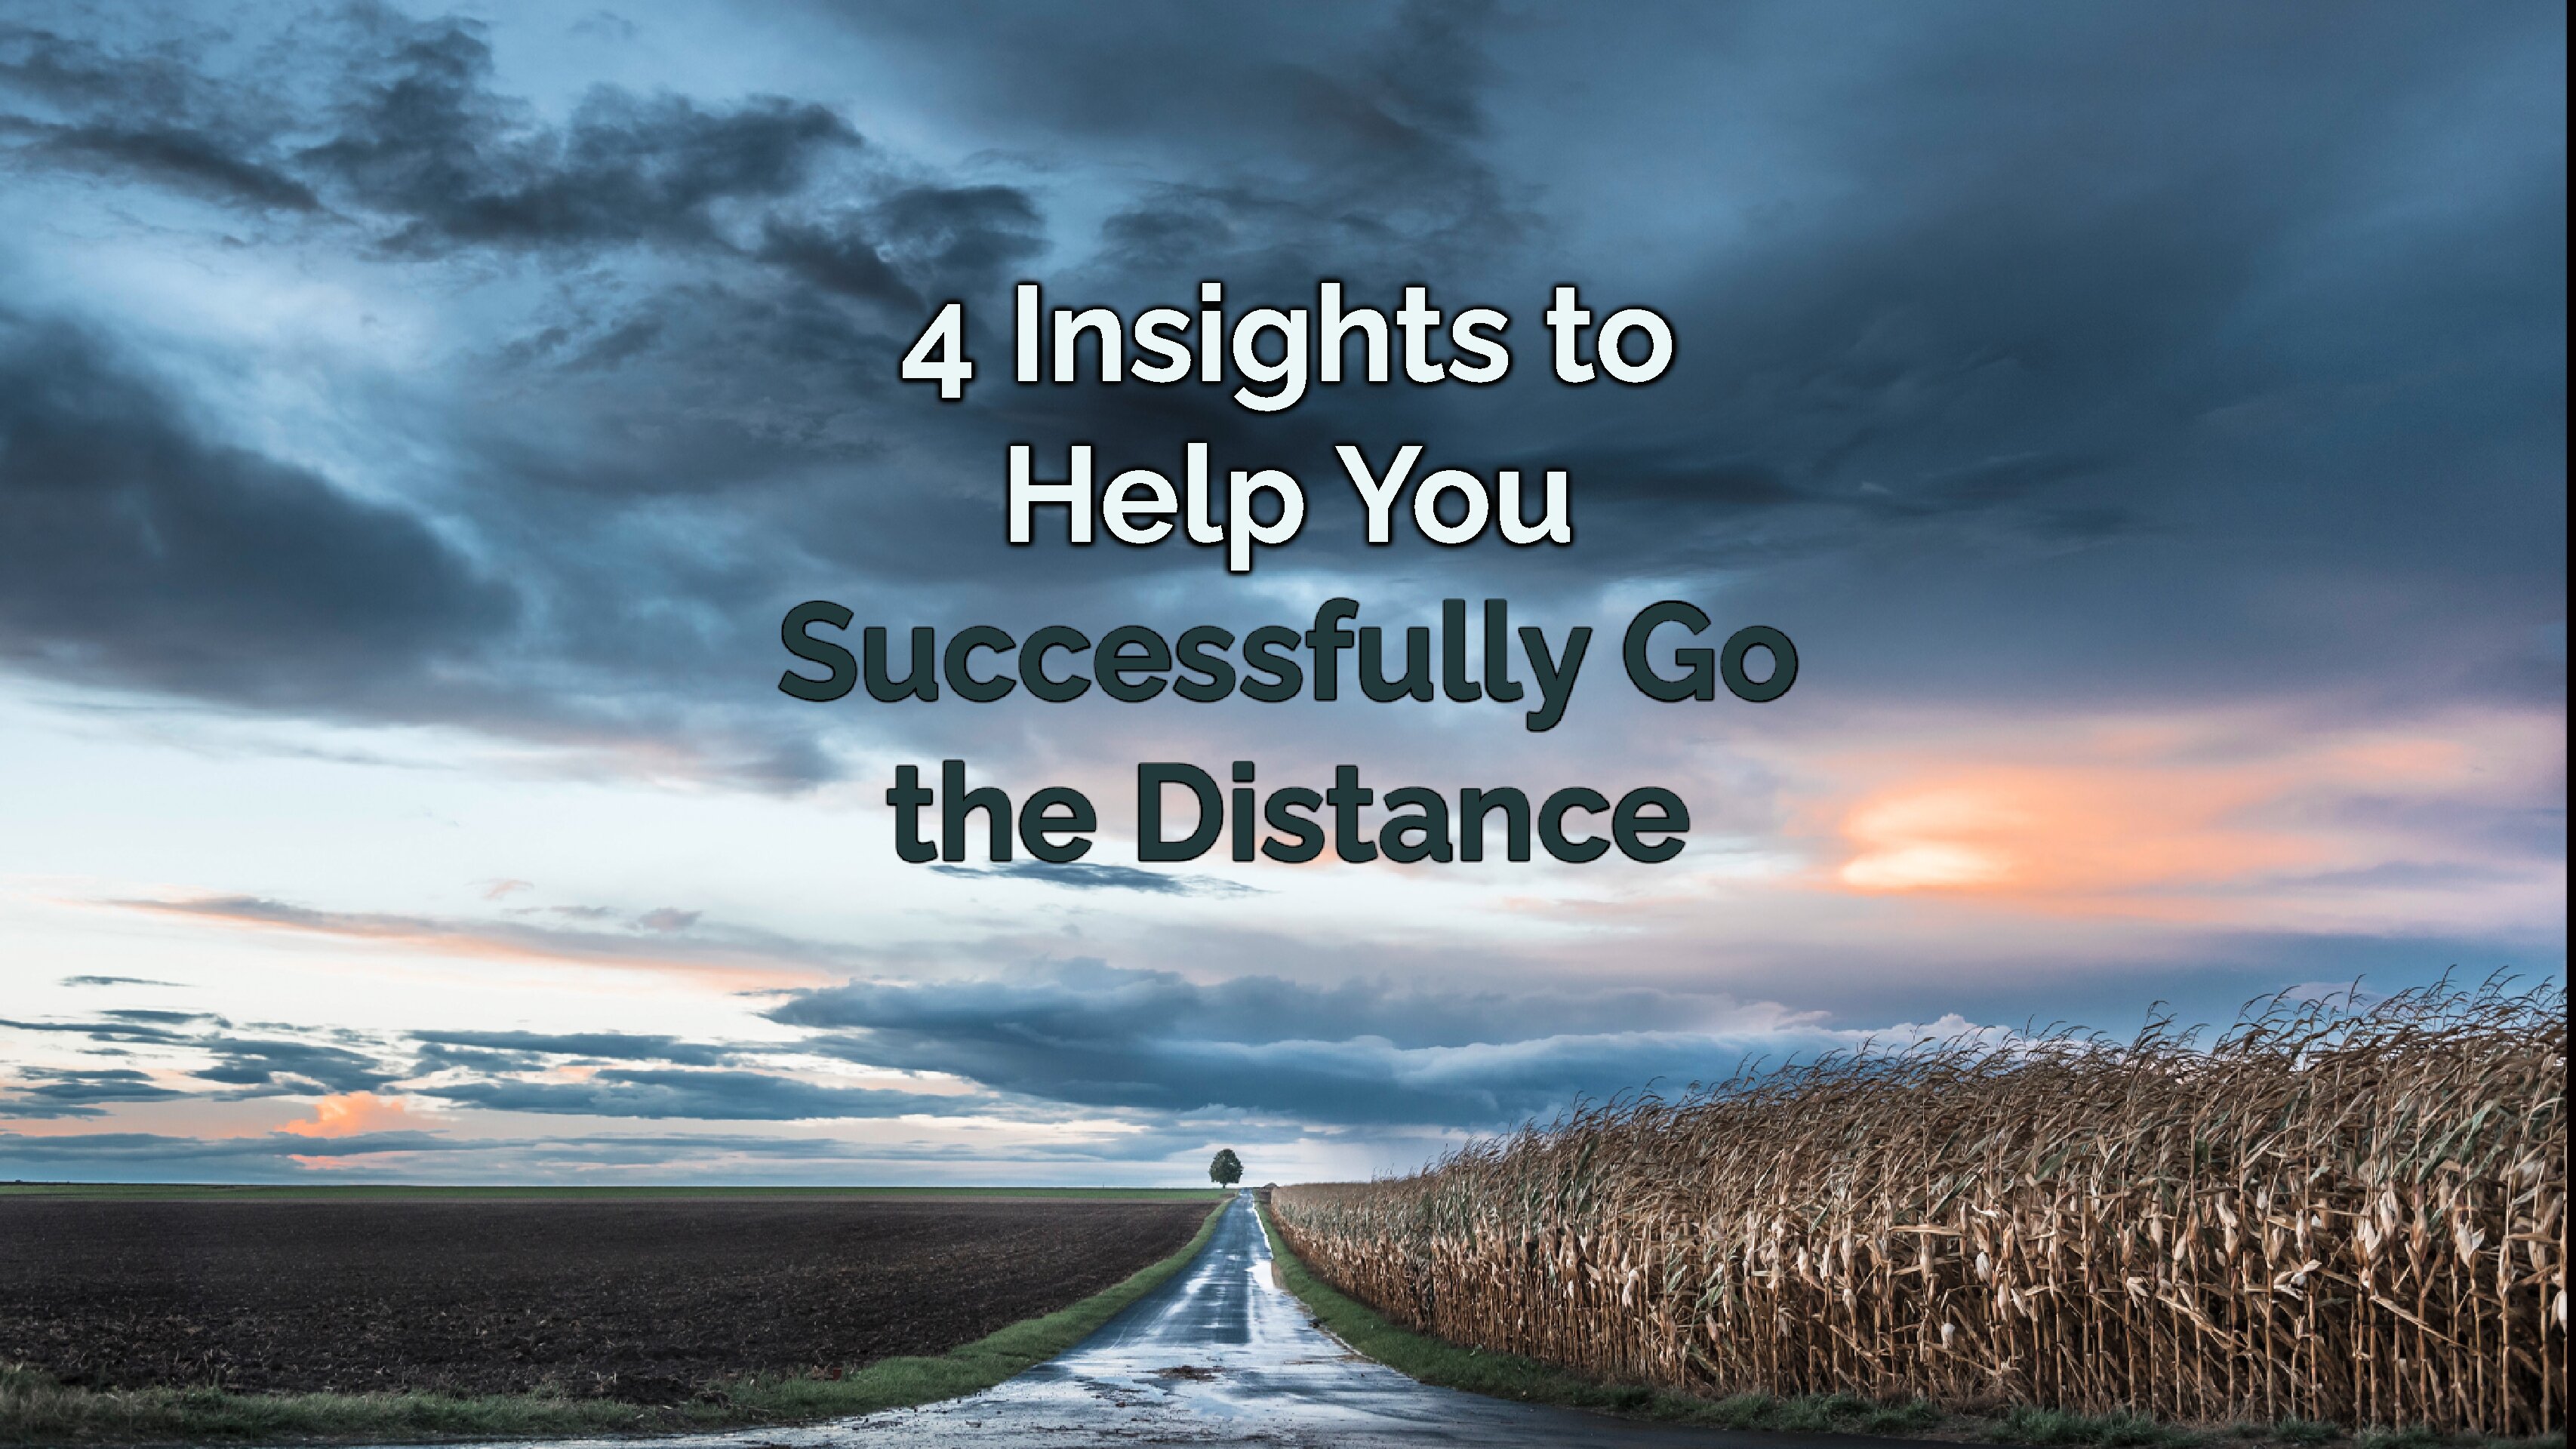 4 Insights to Help You Successfully Go the Distance